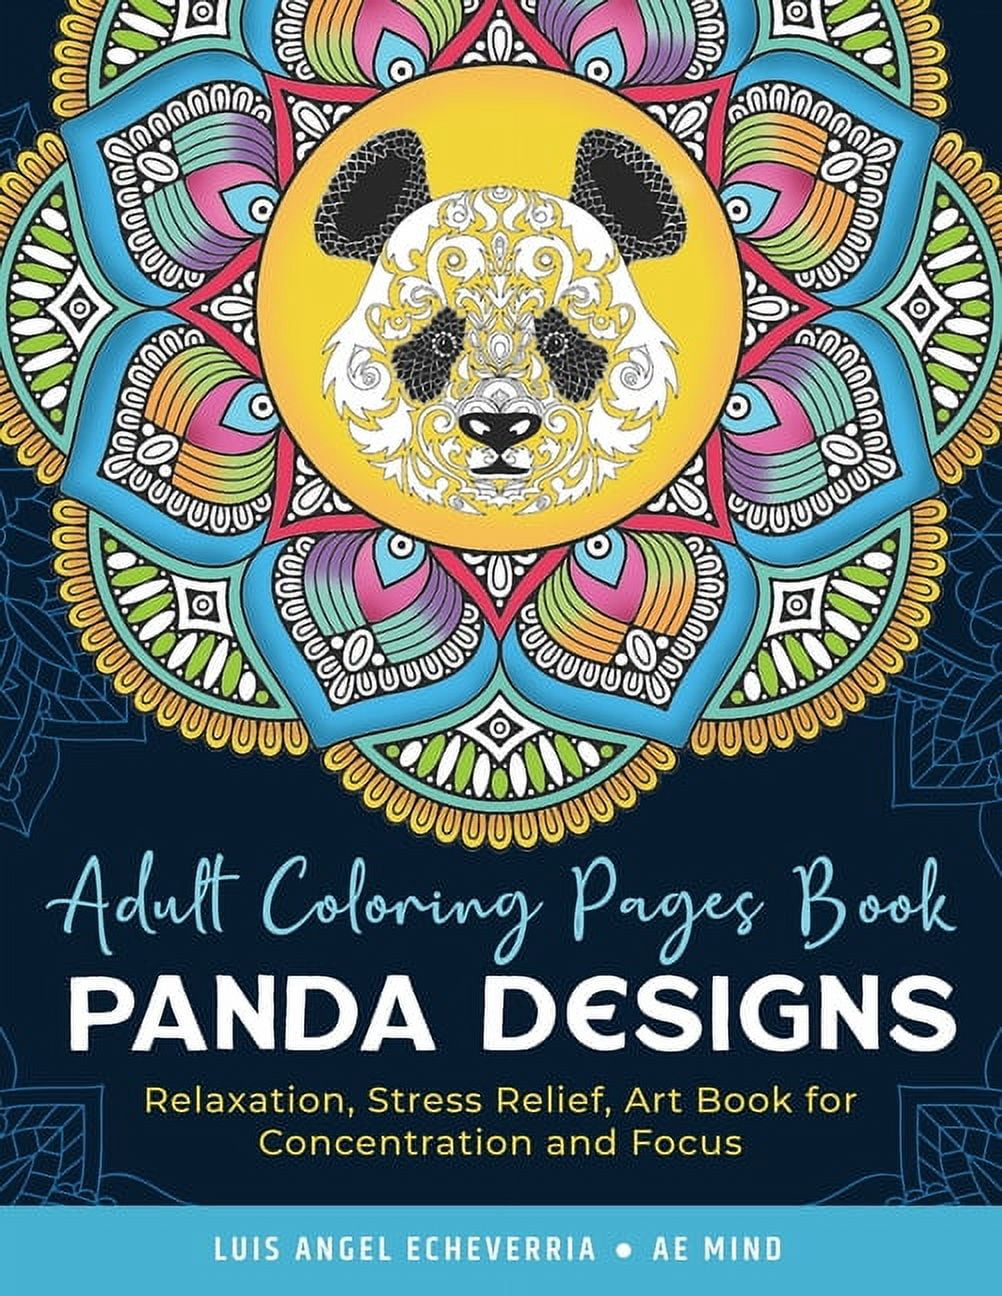 Adult coloring pages book panda designs relaxation stress relief art book for concentration and focus paperback